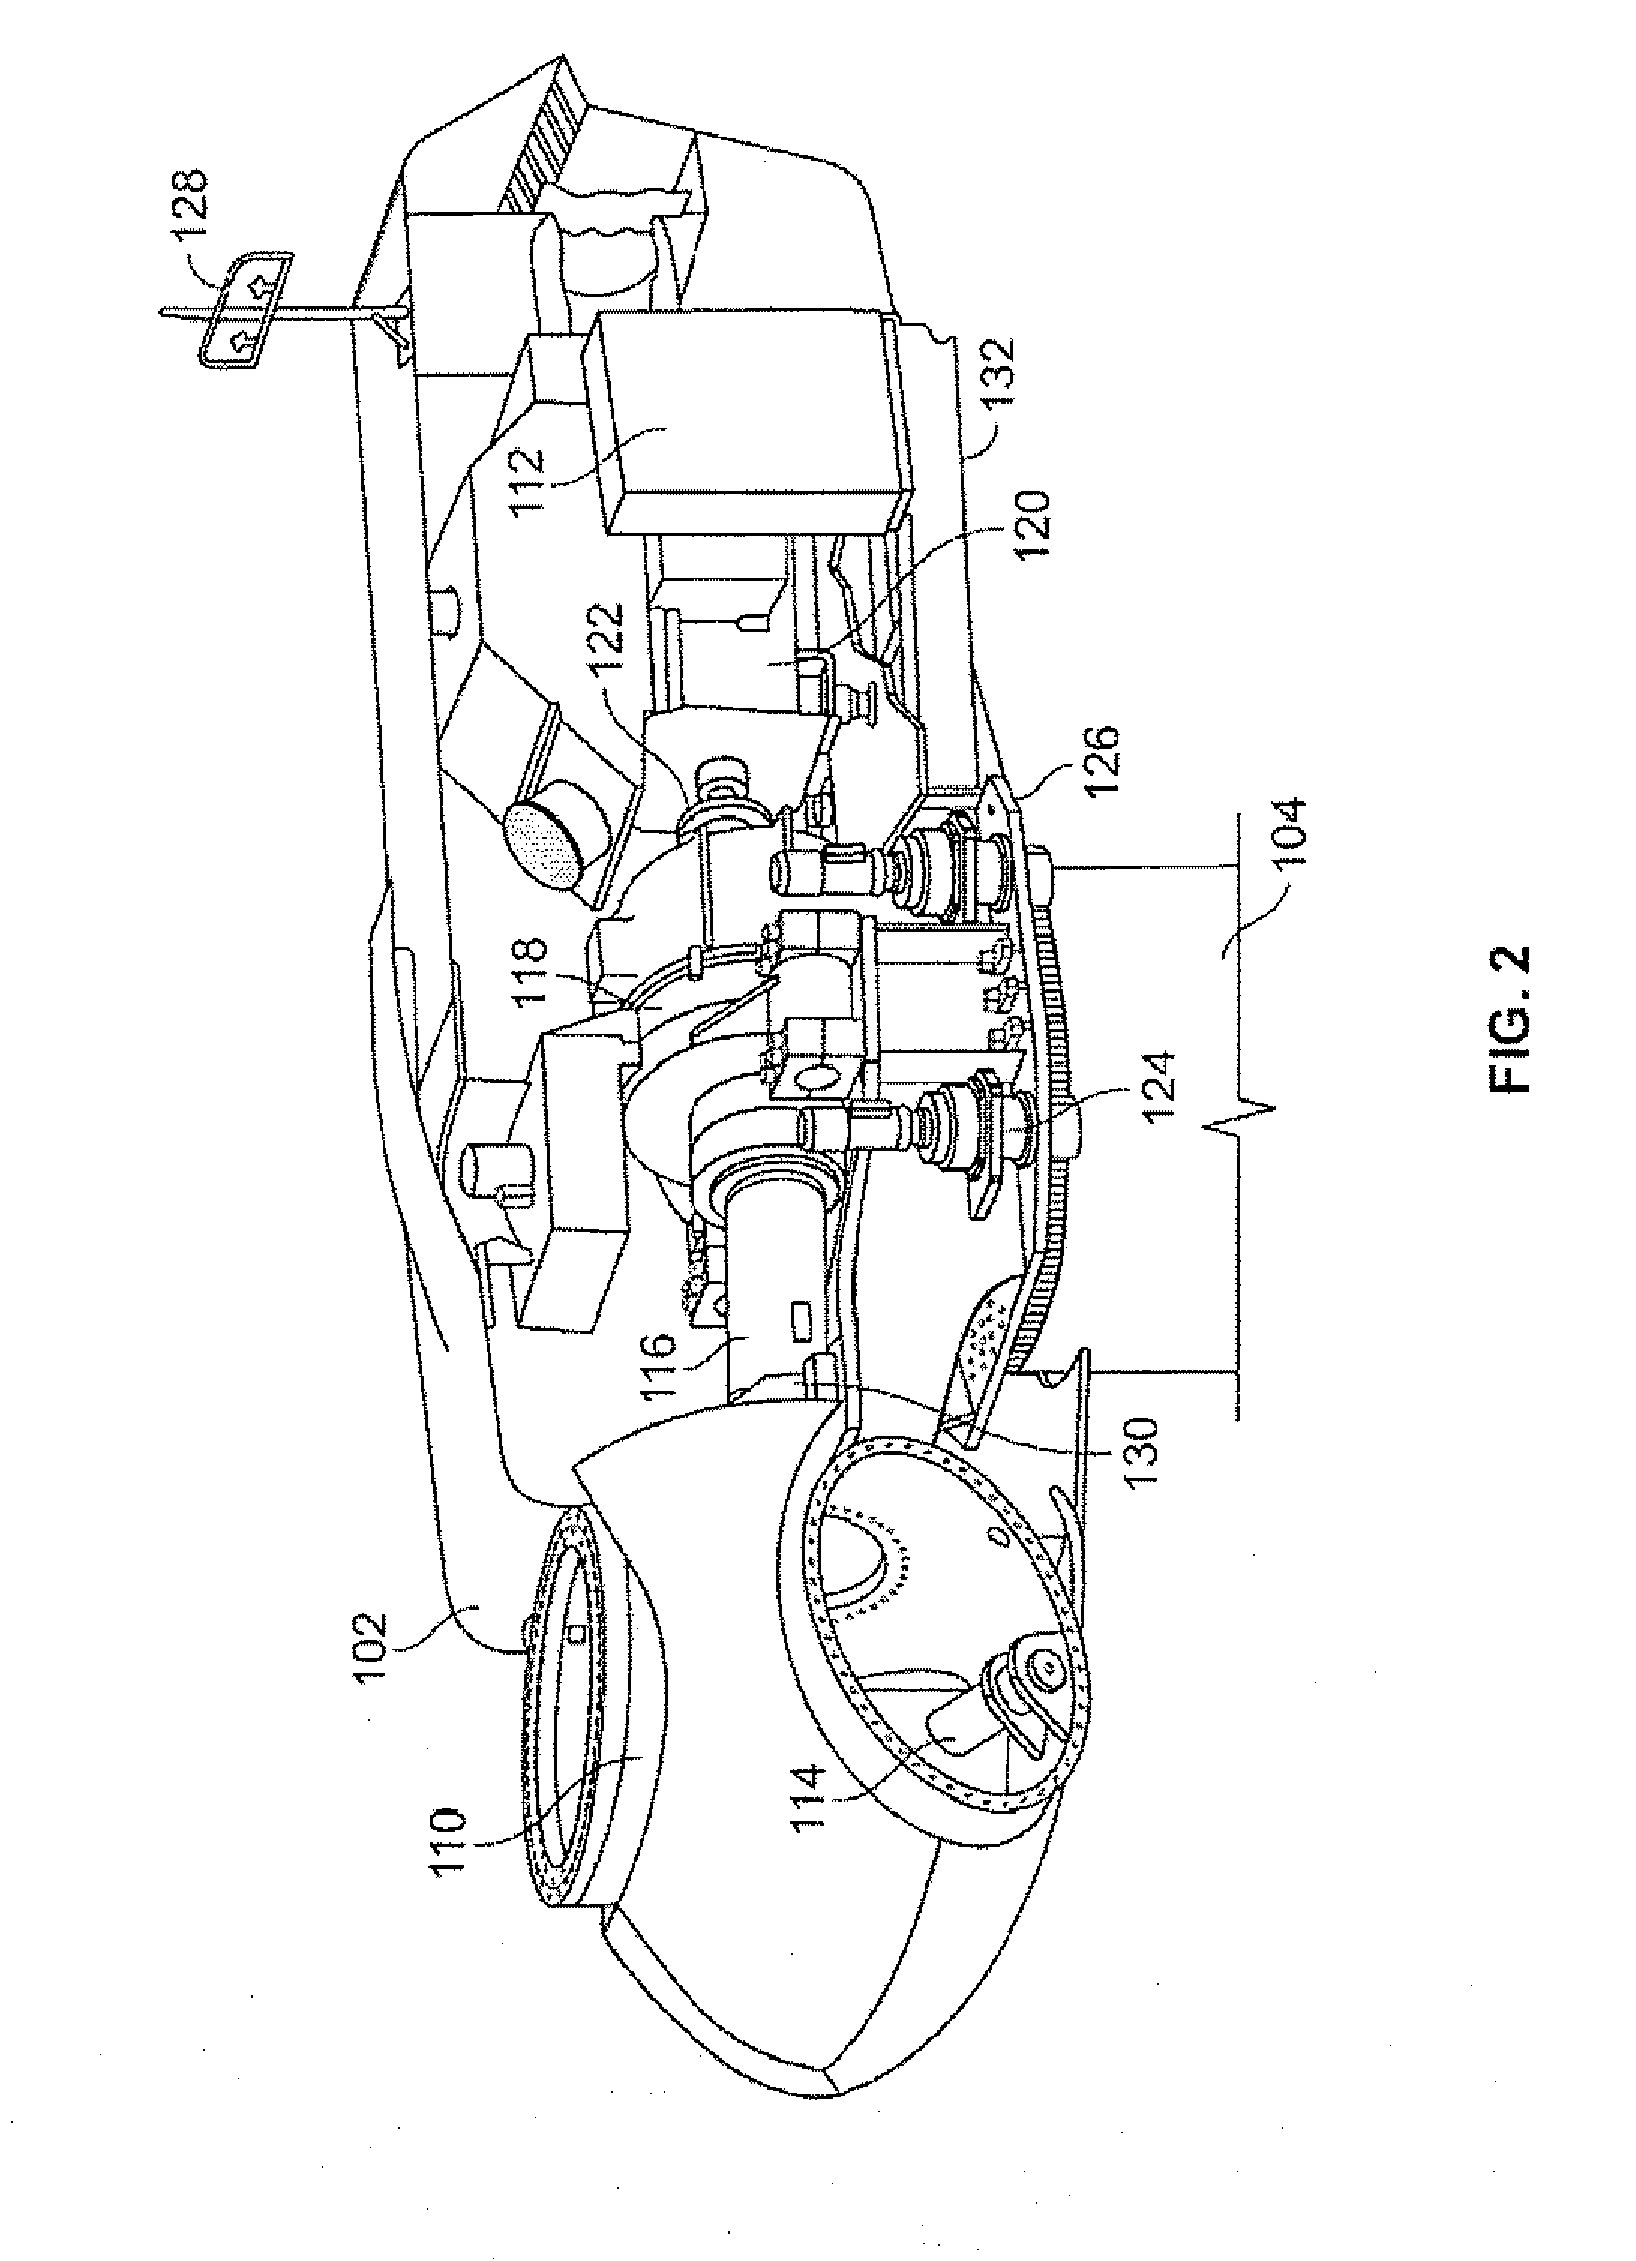 Blade pitch management method and system